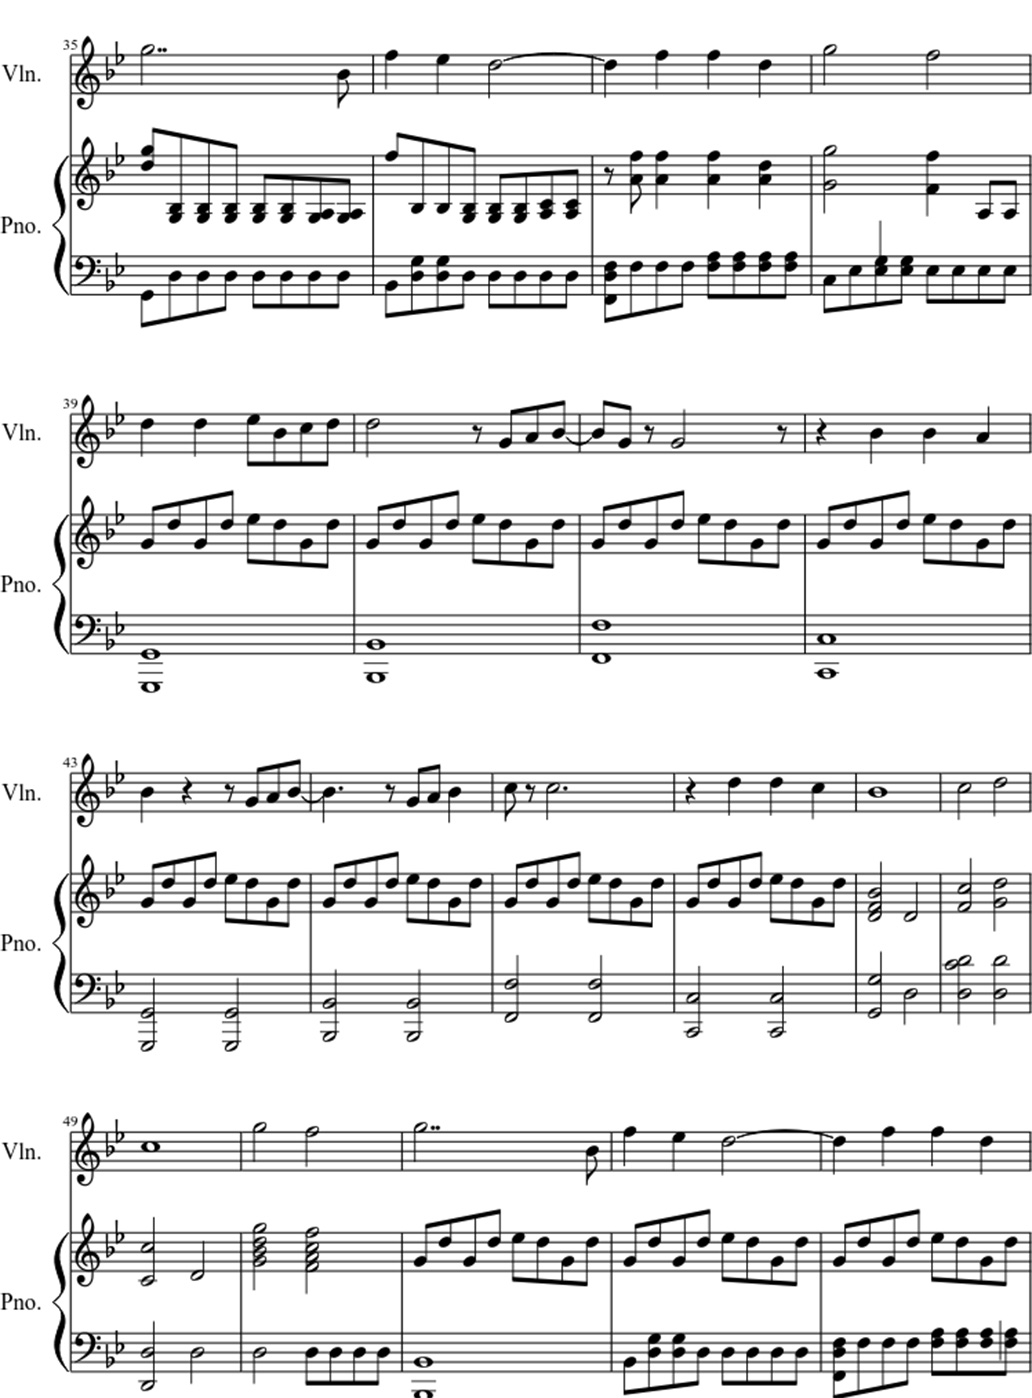 What I've done sheet music notes 3